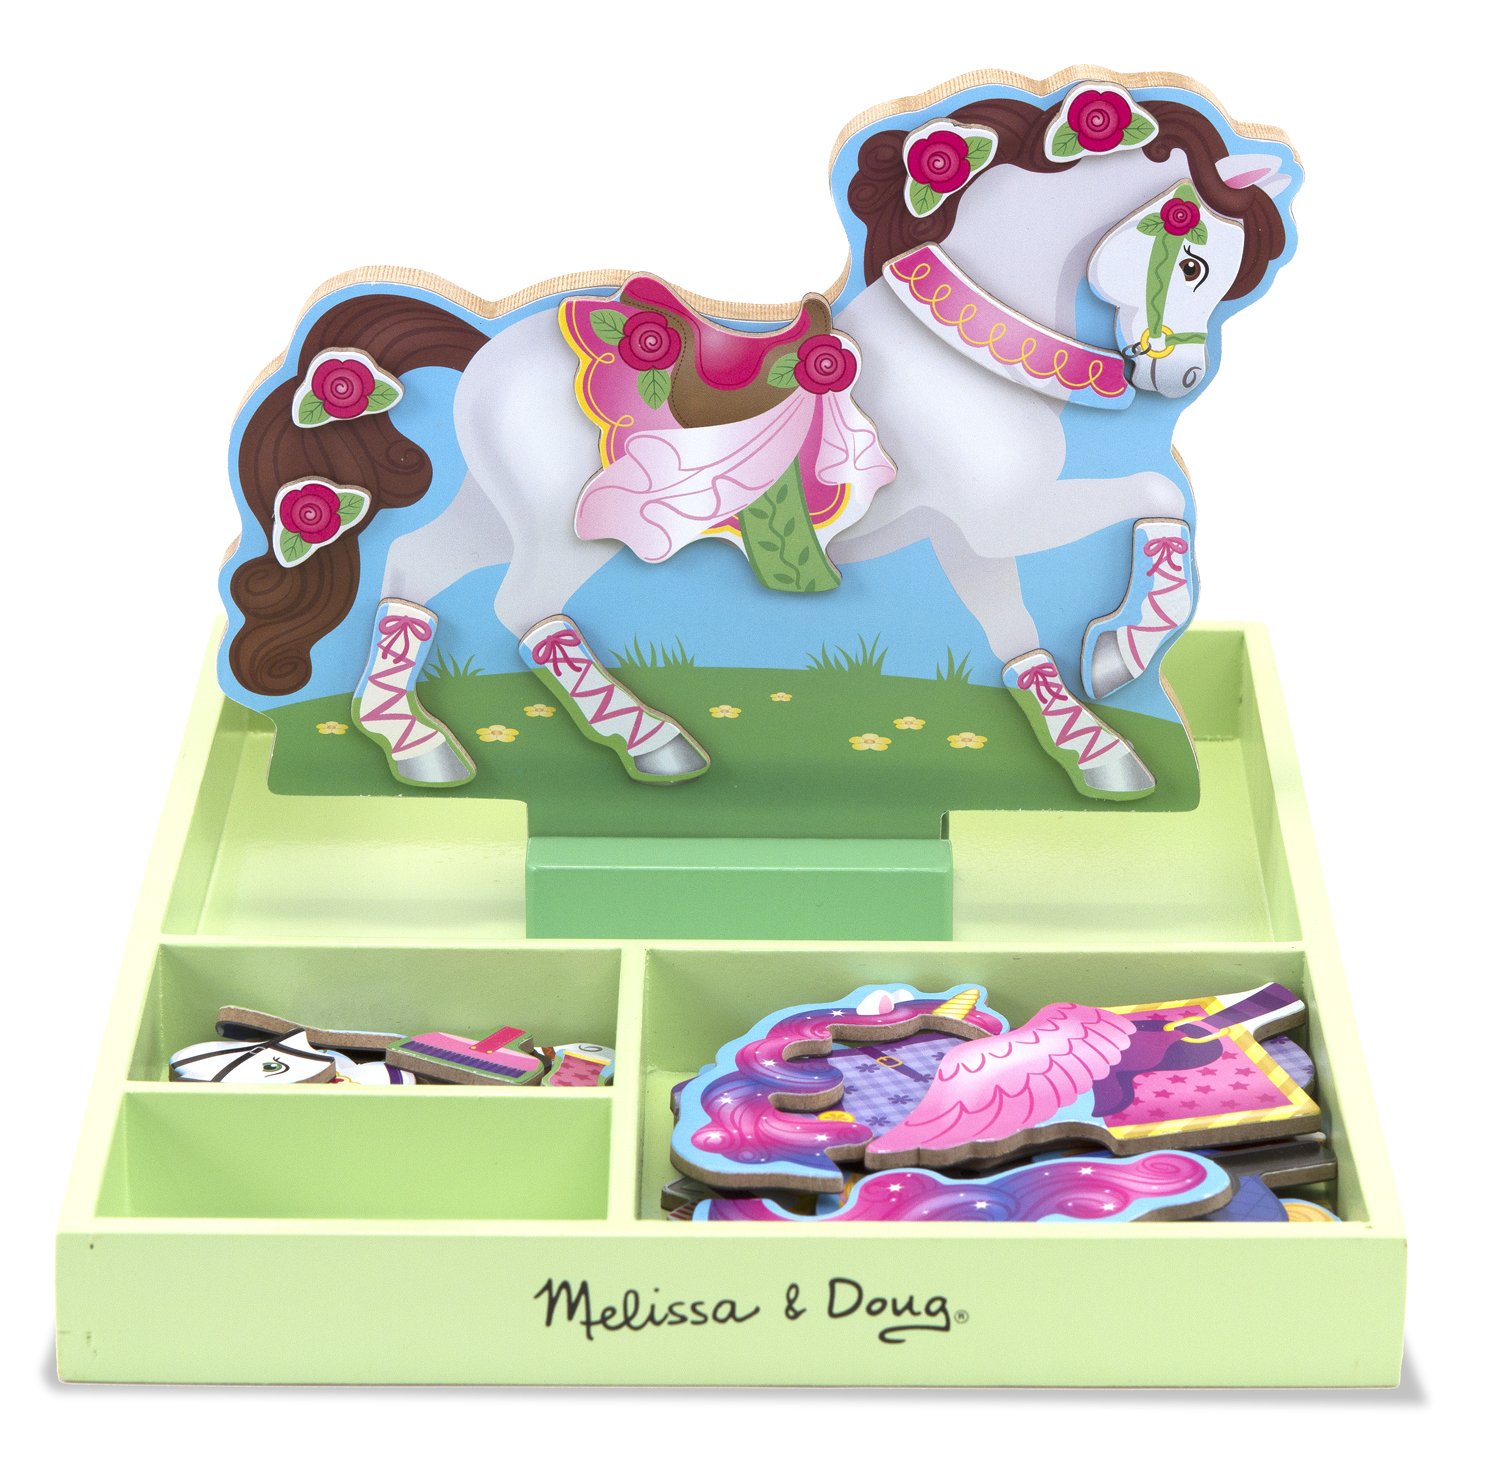 Melissa & Doug My Horse Clover Magnetic Wooden Dress-Up Doll